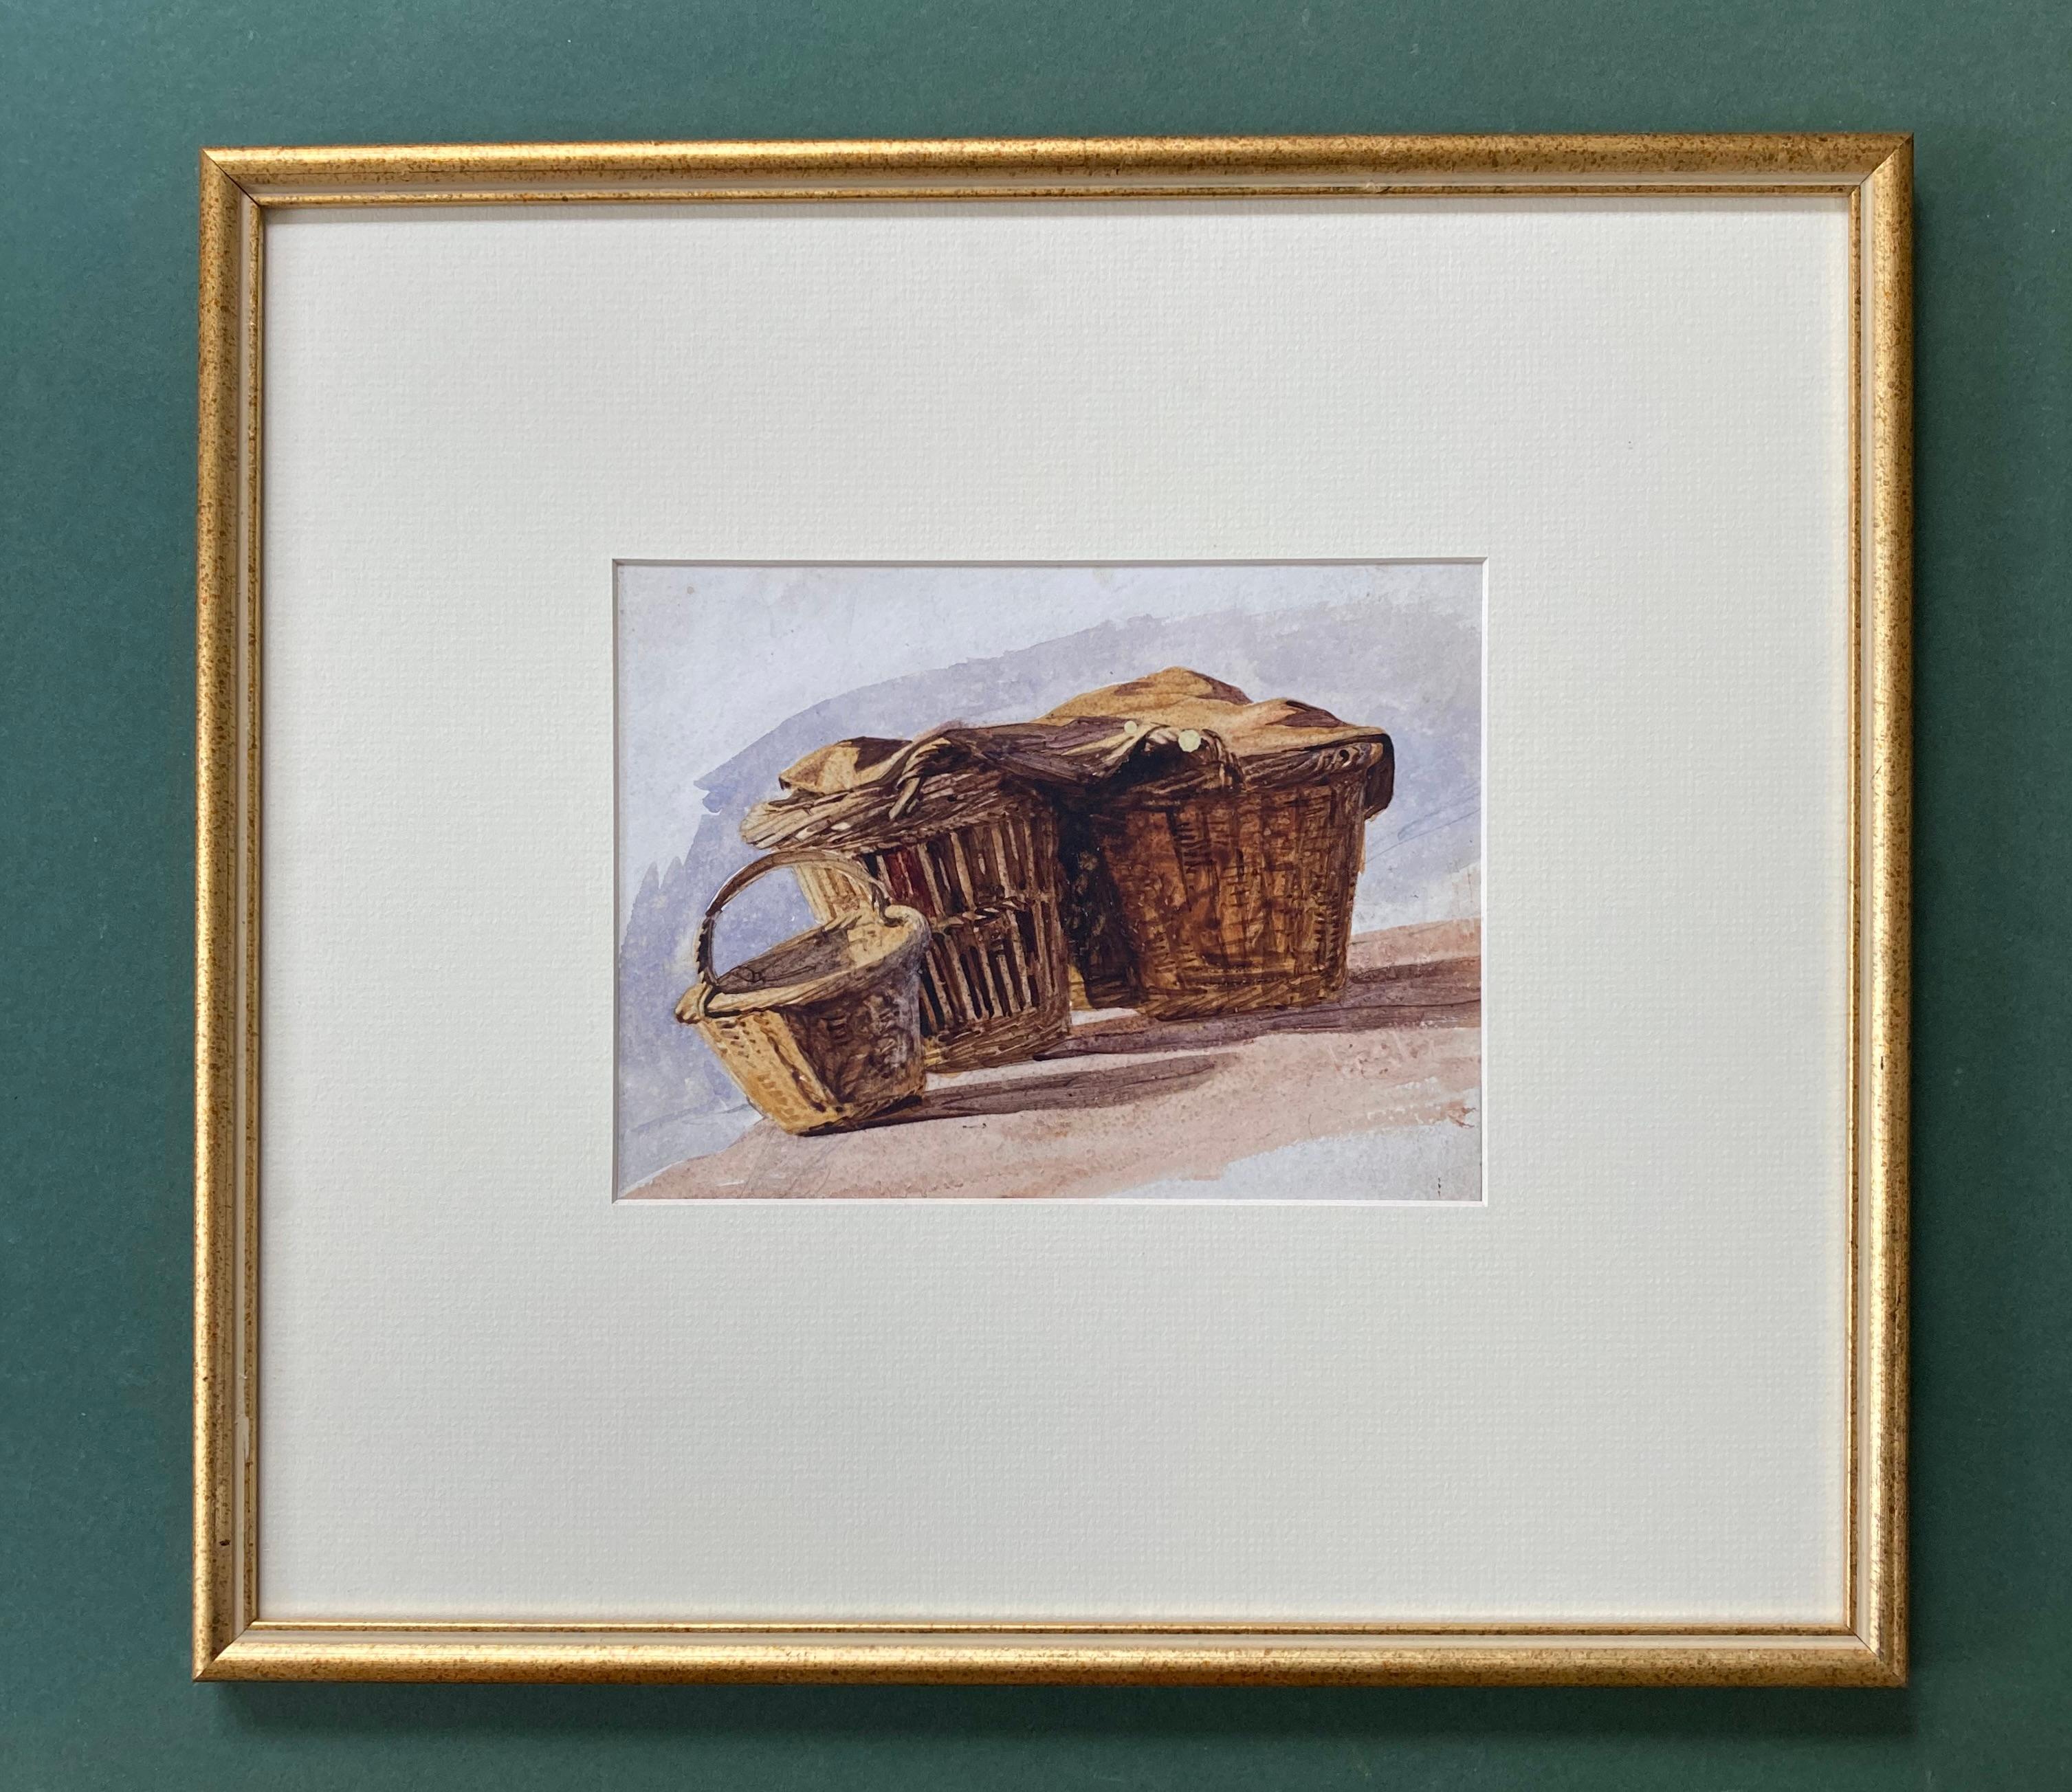 Cotman marine watercolor of fishermen's baskets on the beach - Art by Frederick George Cotman